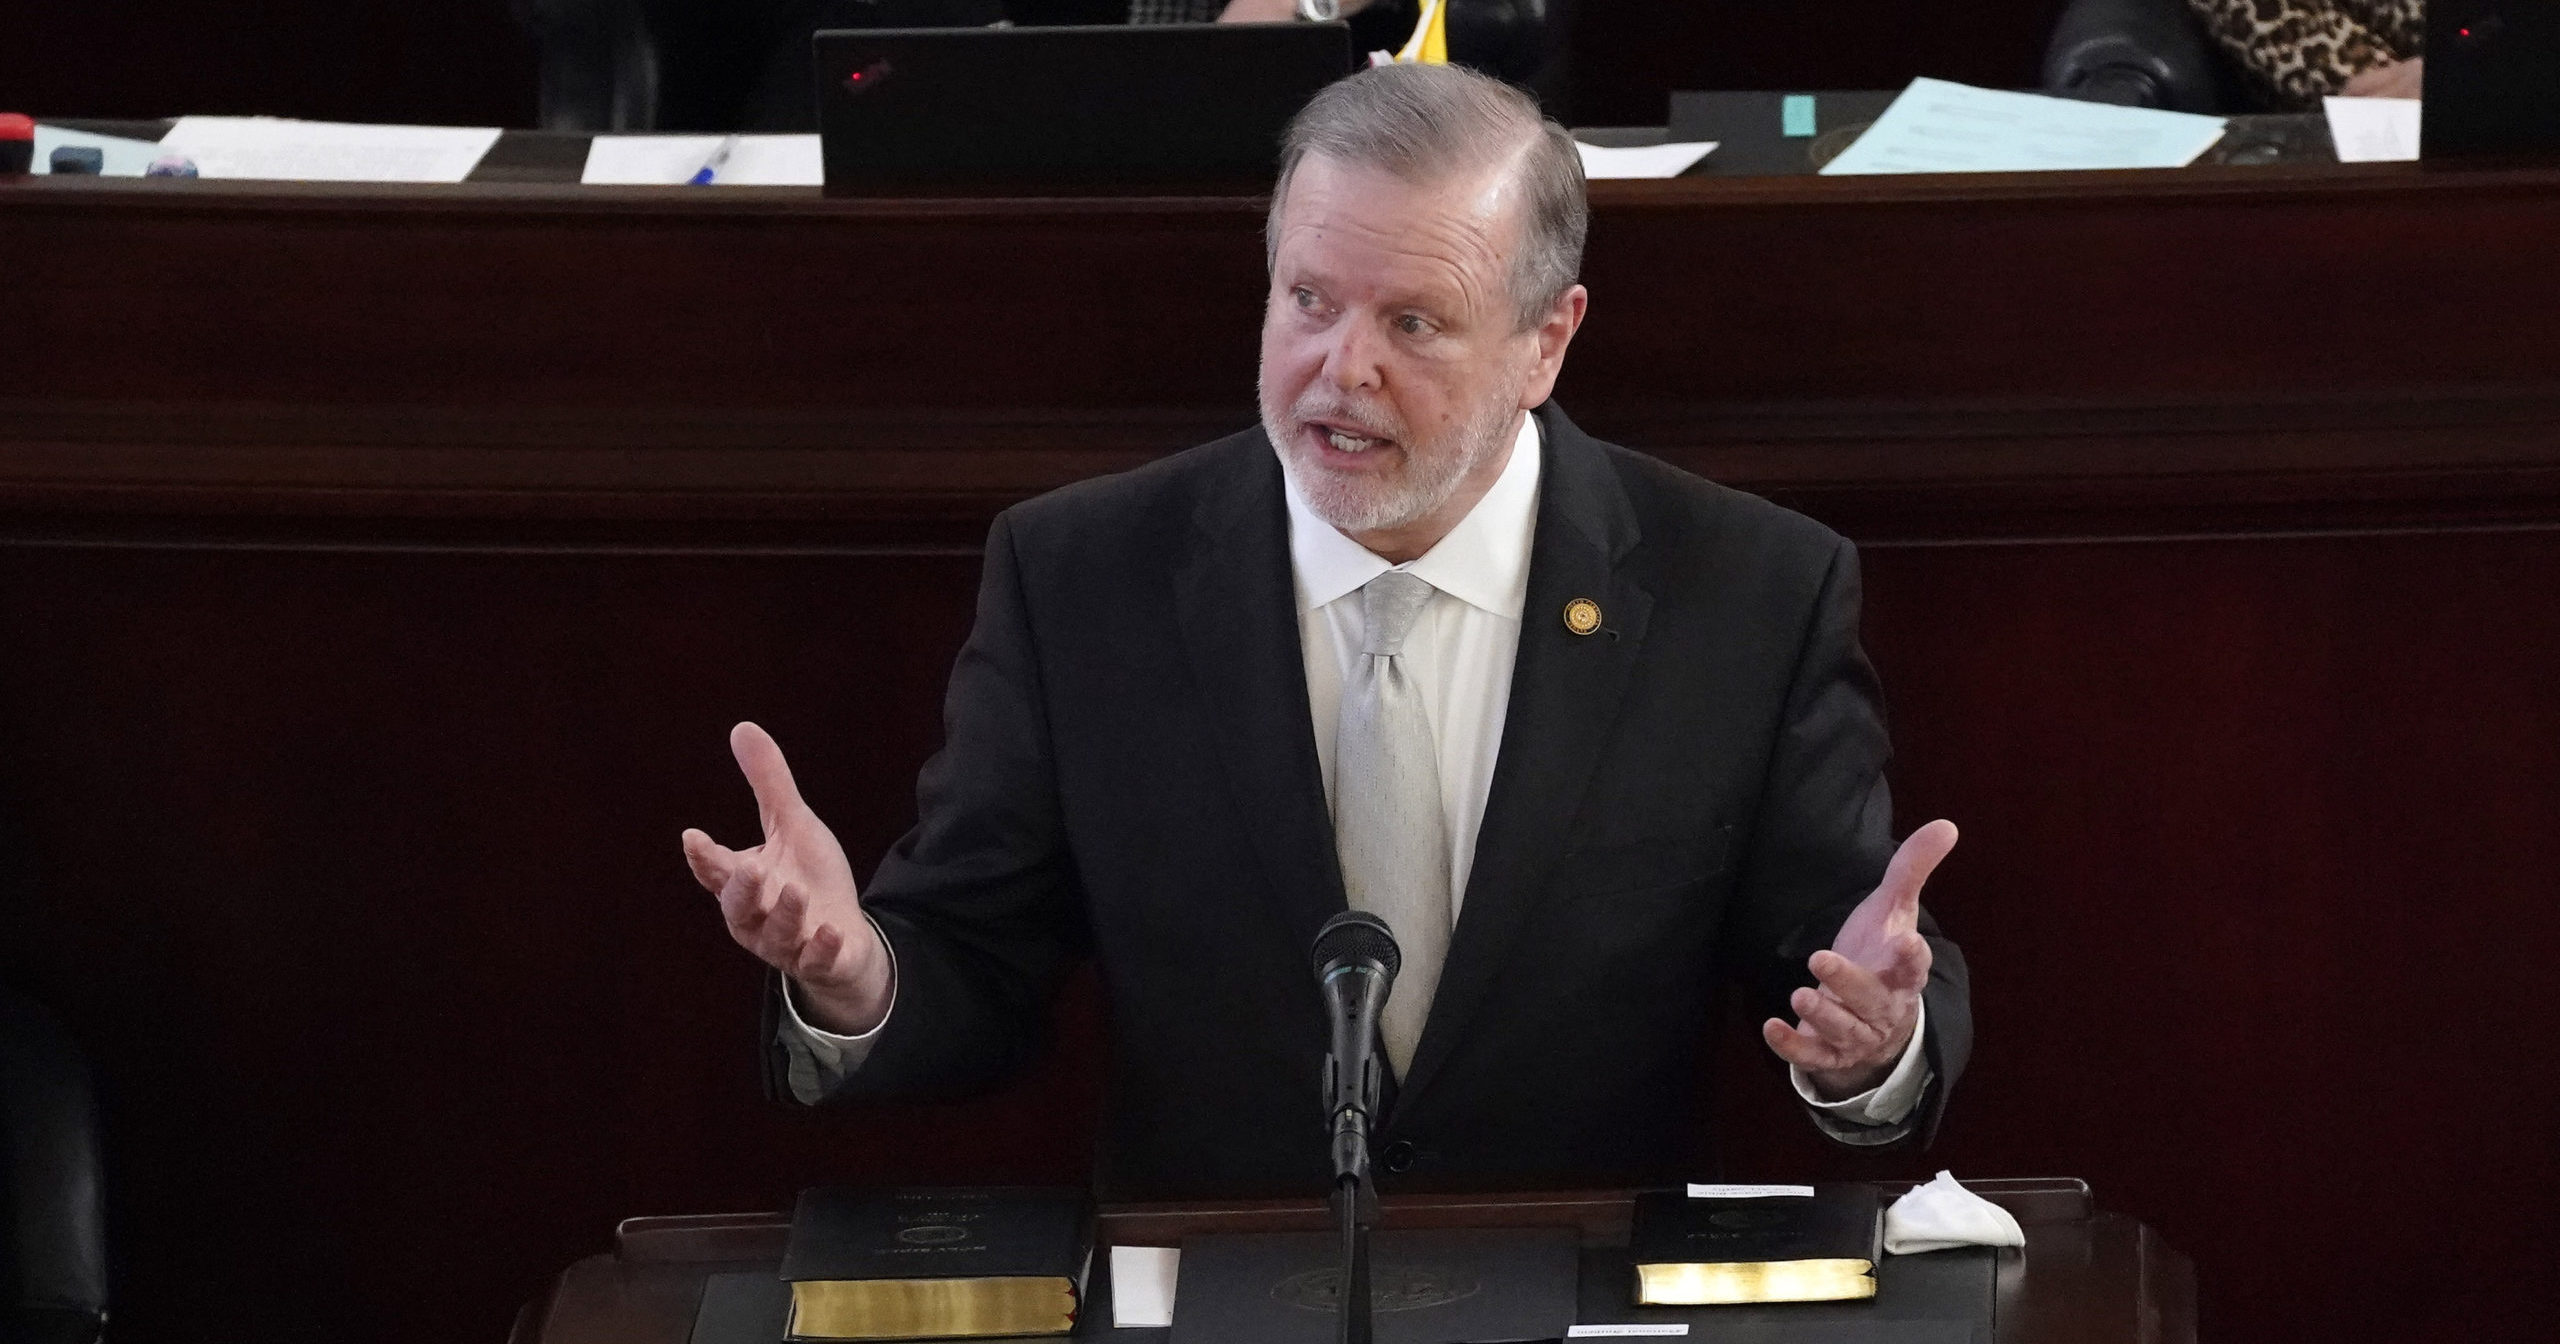 Republican state Sen. Phil Berger speaks after being sworn in during the opening session of the North Carolina General Assembly in Raleigh, North Carolina, on Jan. 13, 2021.